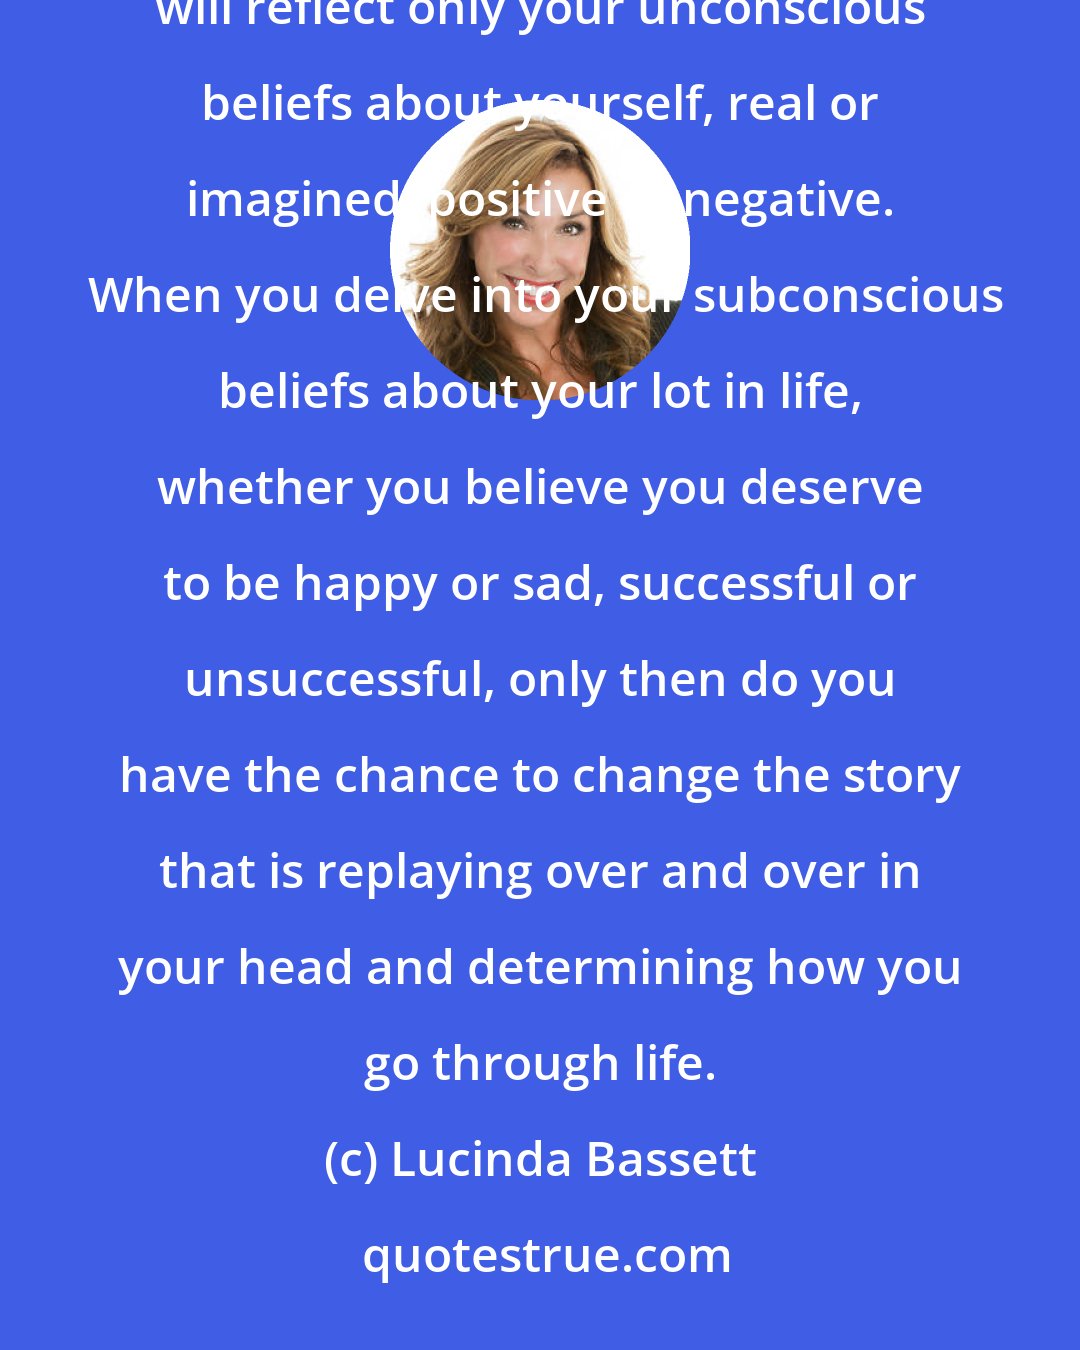 Lucinda Bassett: Until you understand your Core Story, whatever it is, and how it made you who you are today, your foundation will reflect only your unconscious beliefs about yourself, real or imagined, positive or negative.  When you delve into your subconscious beliefs about your lot in life, whether you believe you deserve to be happy or sad, successful or unsuccessful, only then do you have the chance to change the story that is replaying over and over in your head and determining how you go through life.